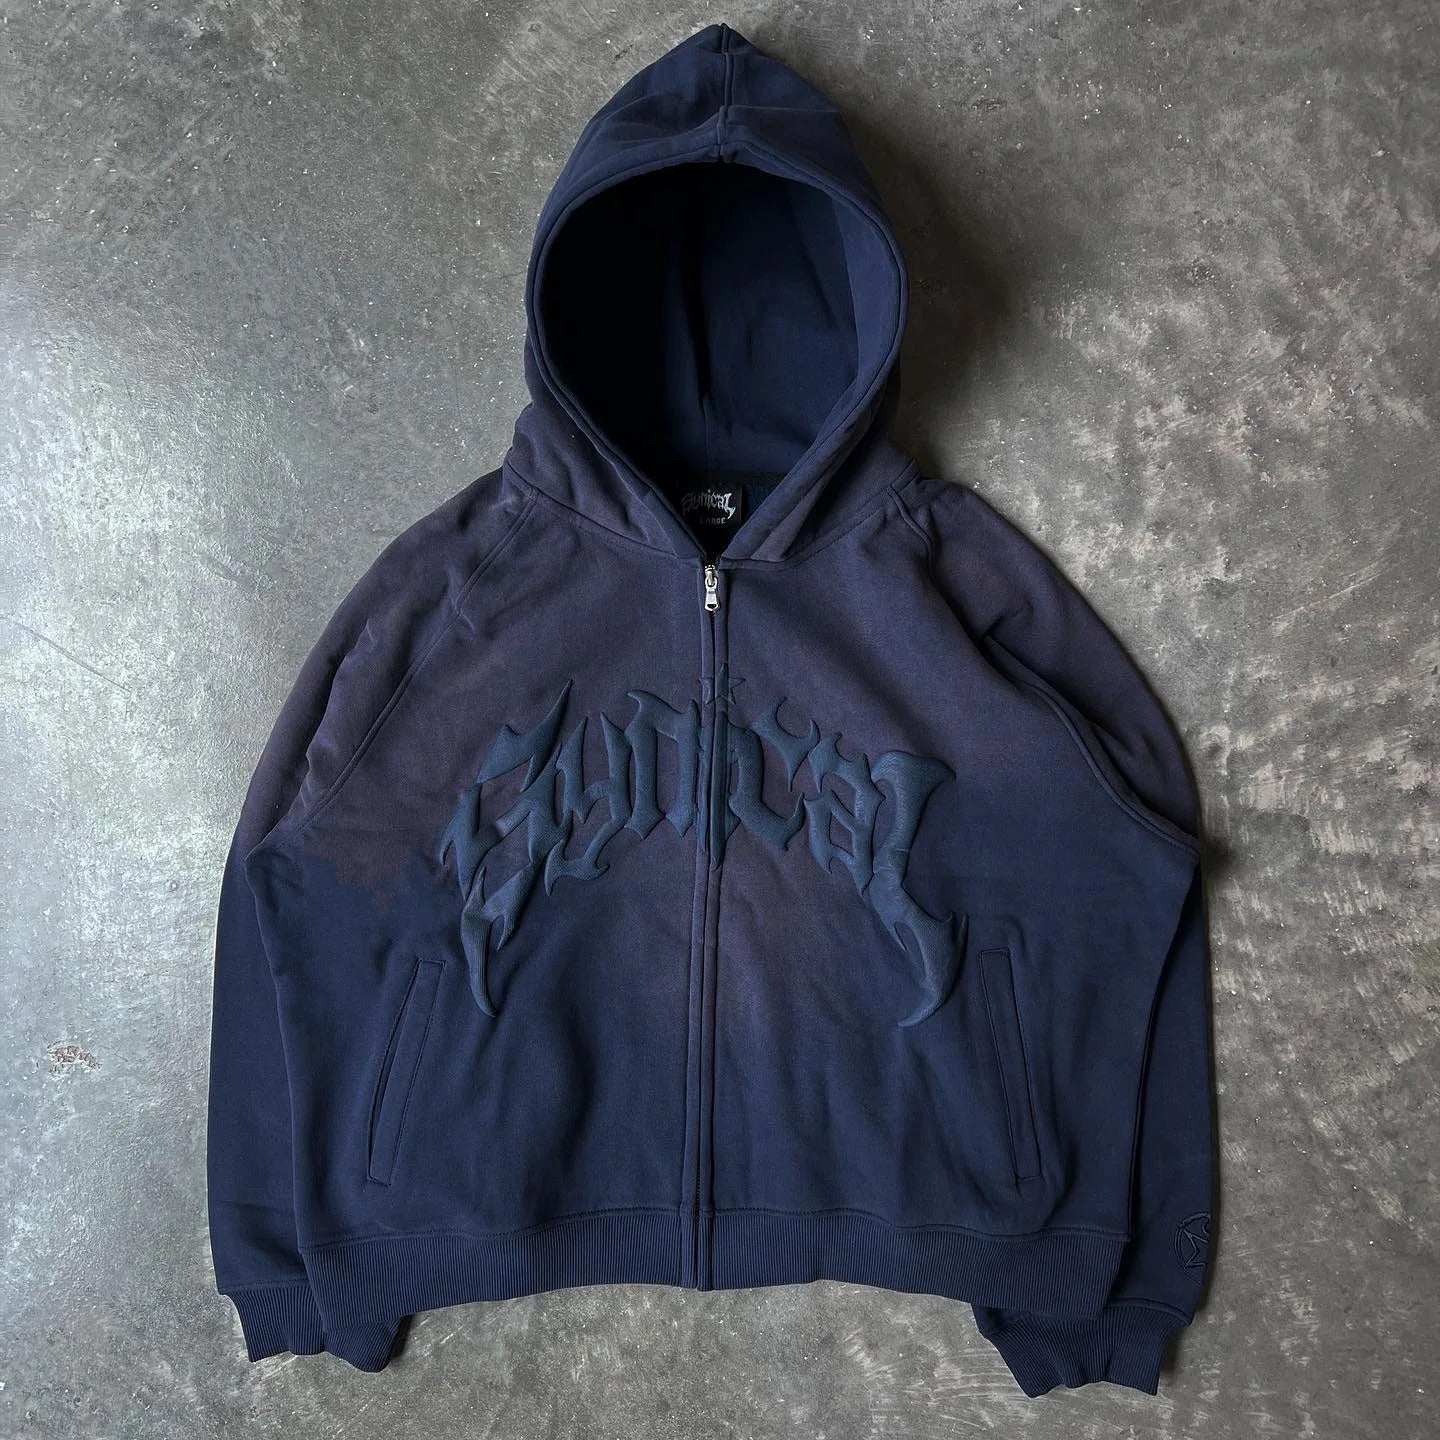 synical zip up